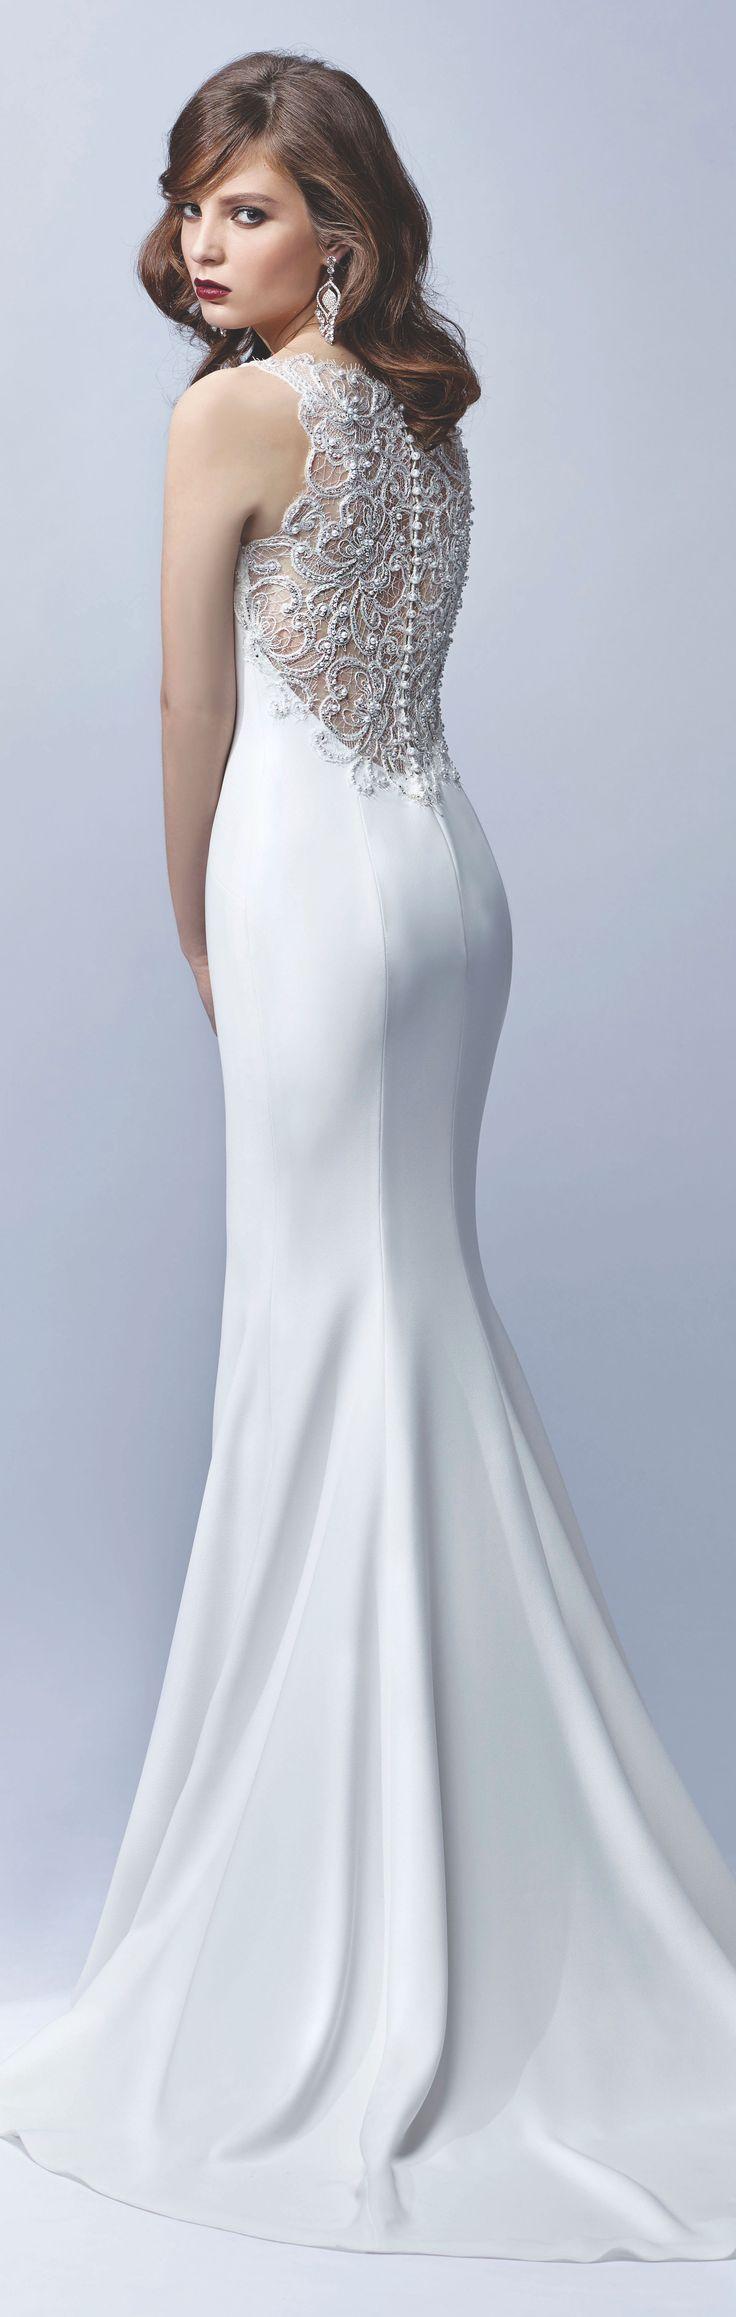 Wedding - Wedding Dresses & Bridal Gowns Summer/Winter 2015 Collection UK - Enzoani